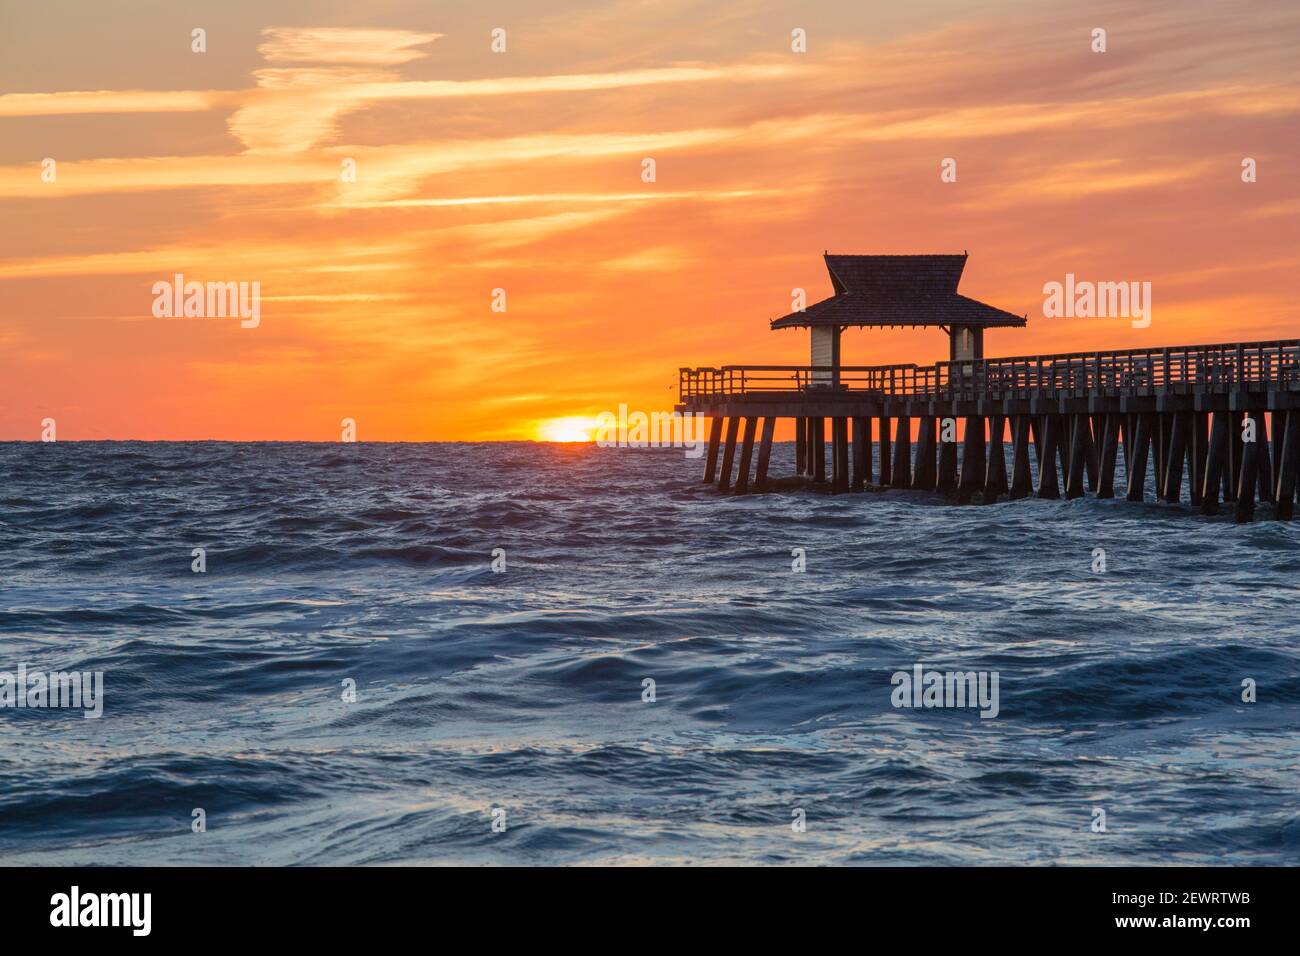 View across the Gulf of Mexico from beach beside Naples Pier, sunset, golden sky above horizon, Naples, Florida, United States of America Stock Photo